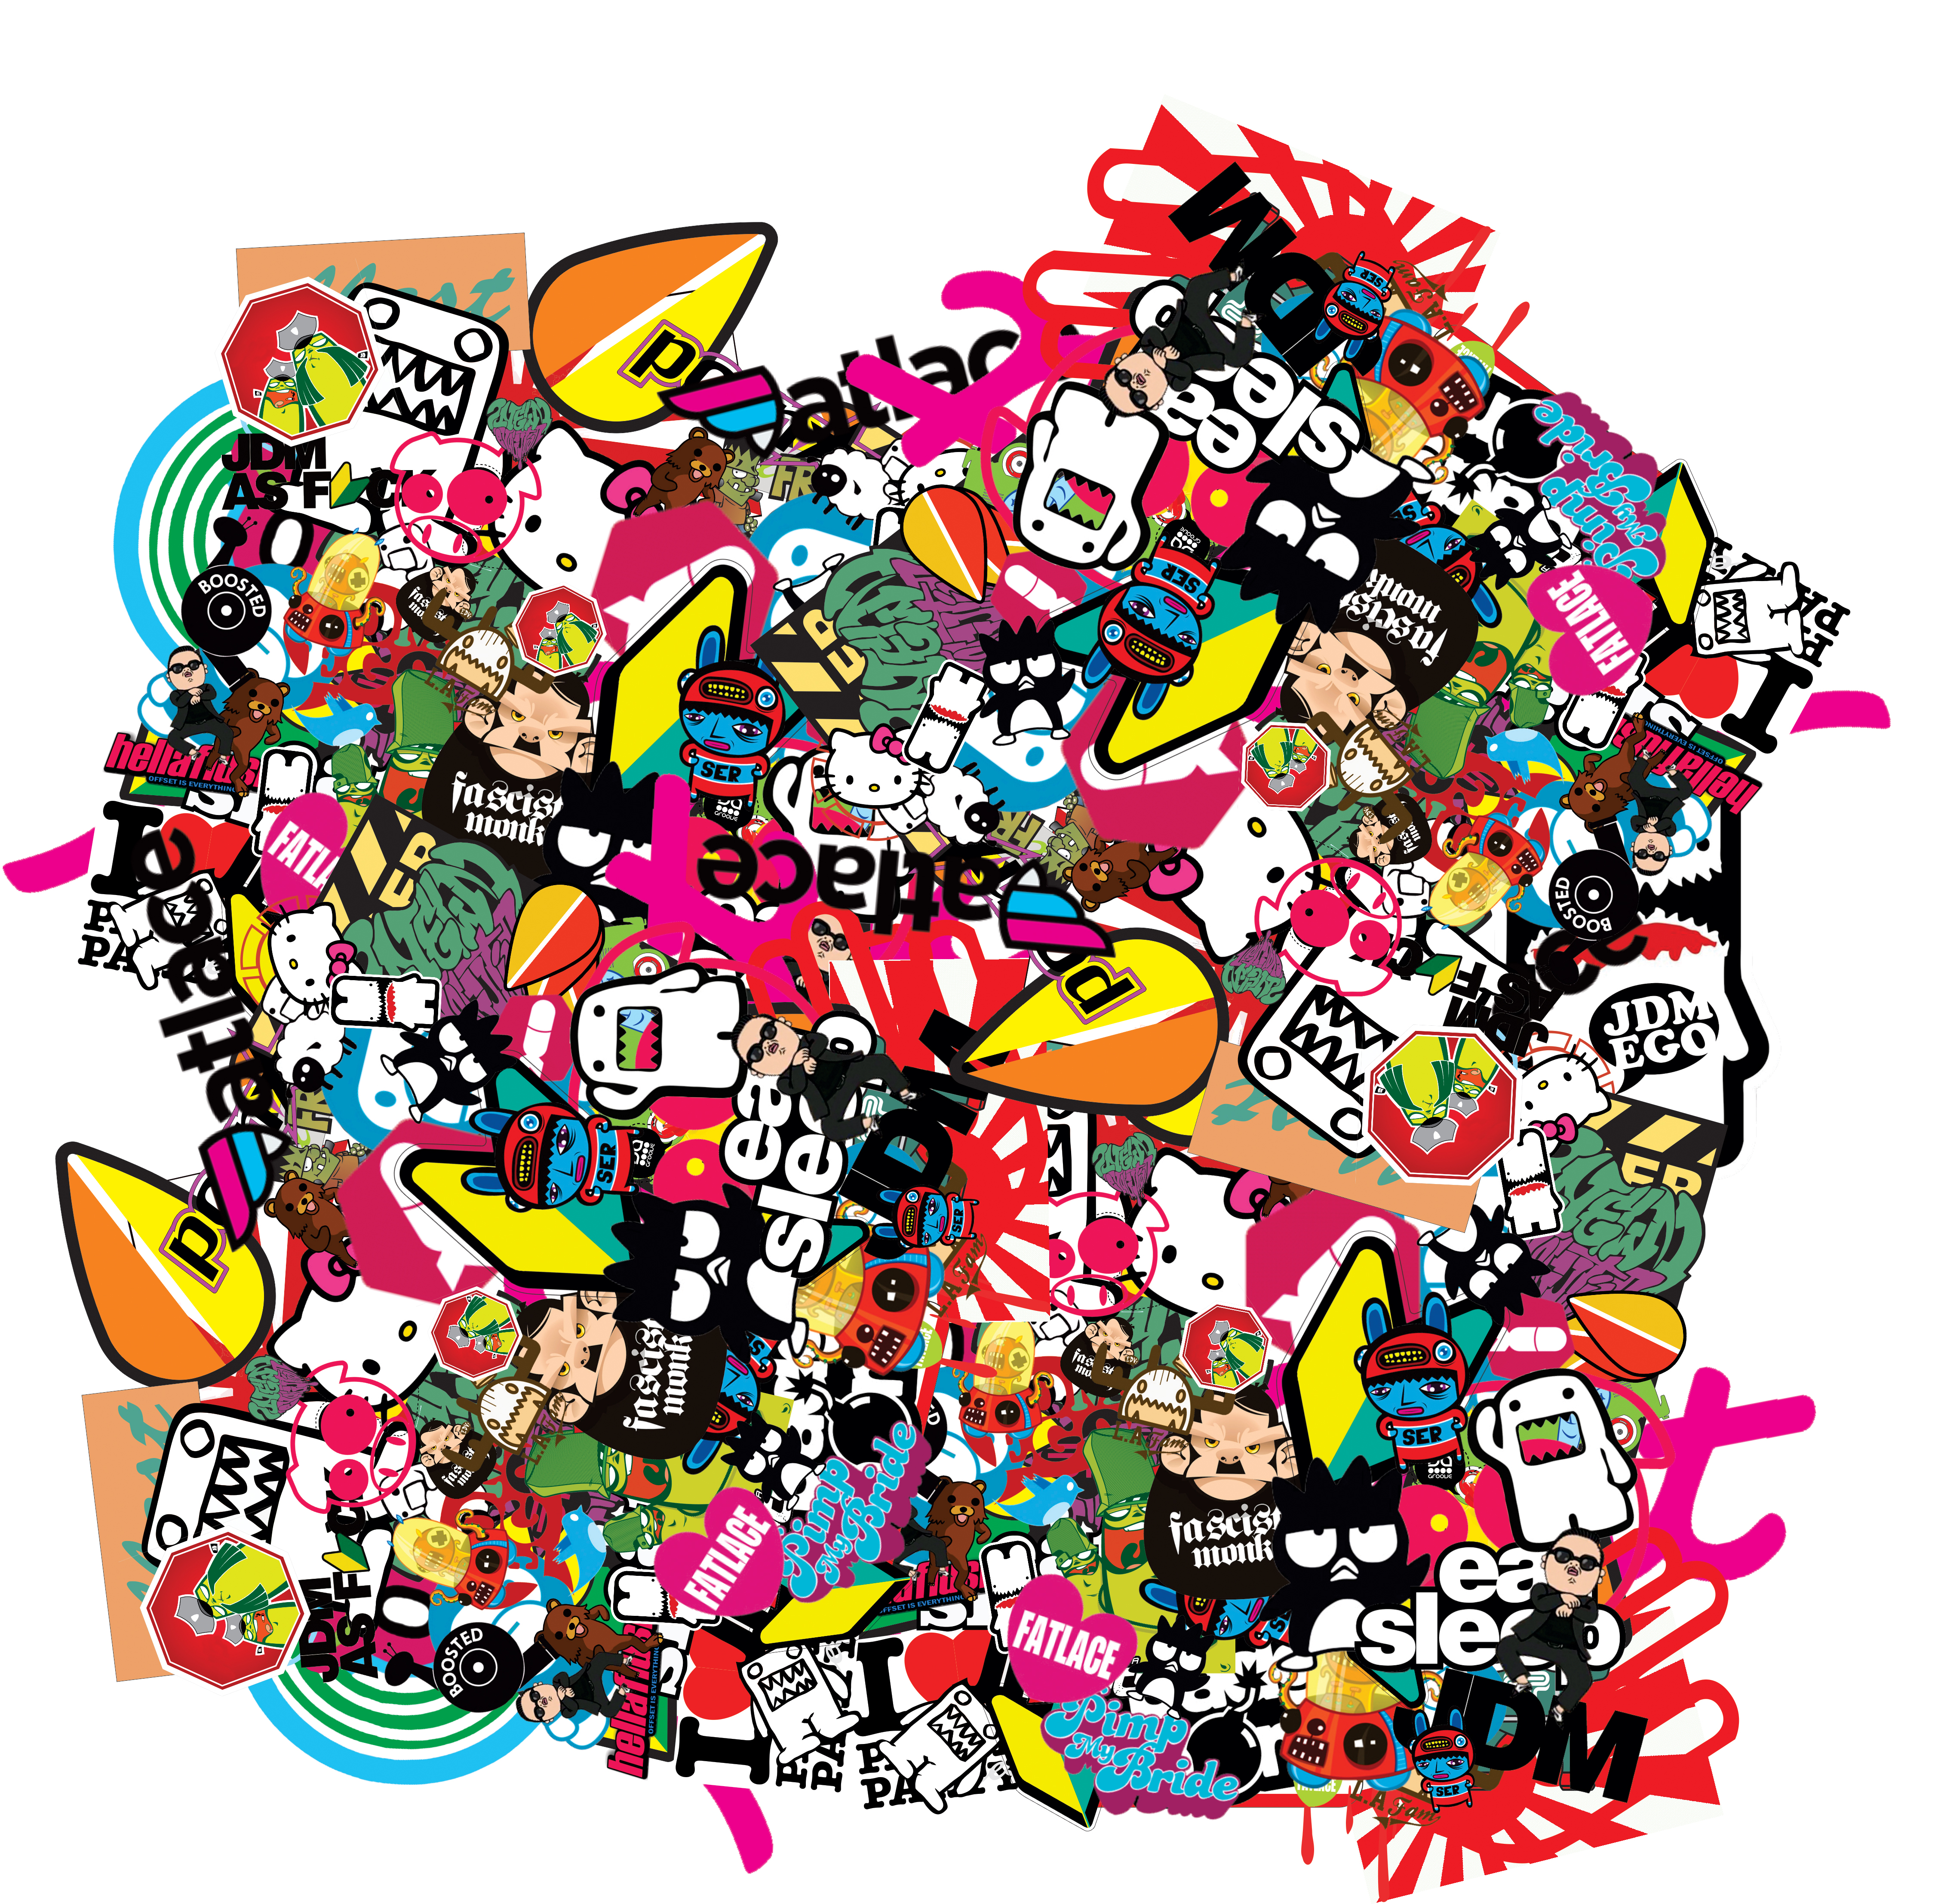 free download sticker bomb hd wallpaper 1080p resolution on anime stickers wallpapers